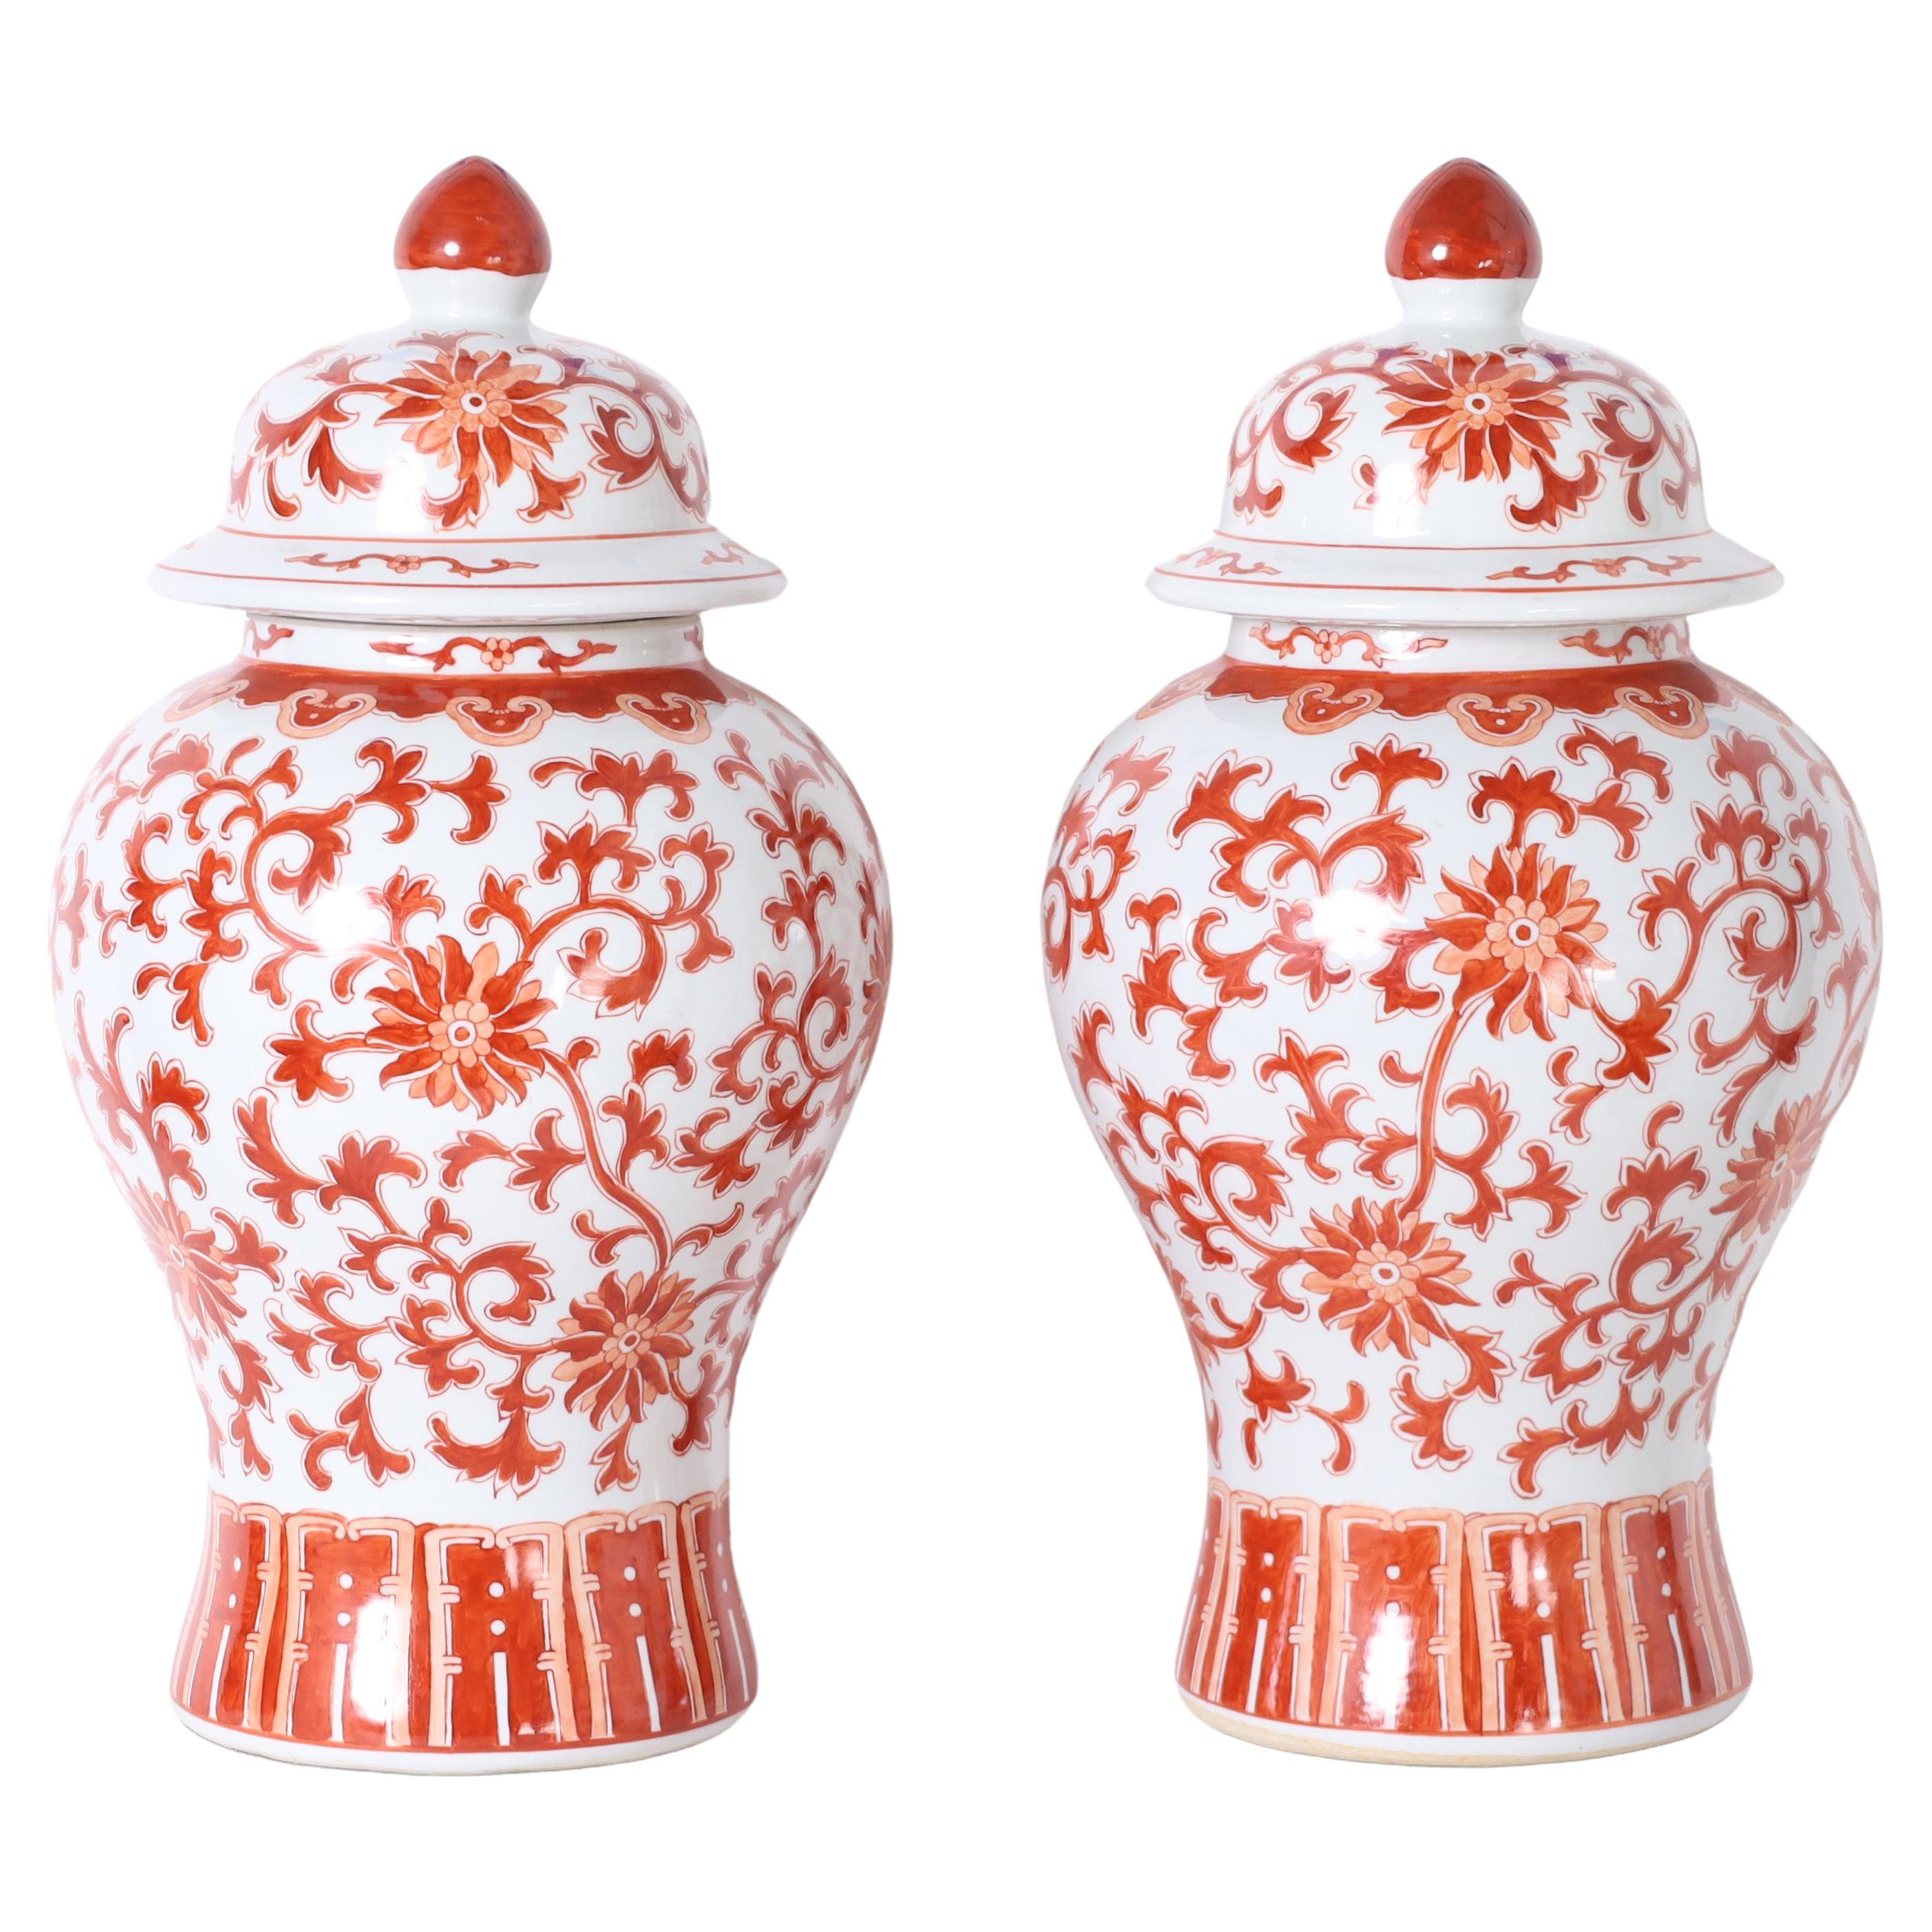 Pair of Red and White Porcelain Lidded Urns or Jars For Sale